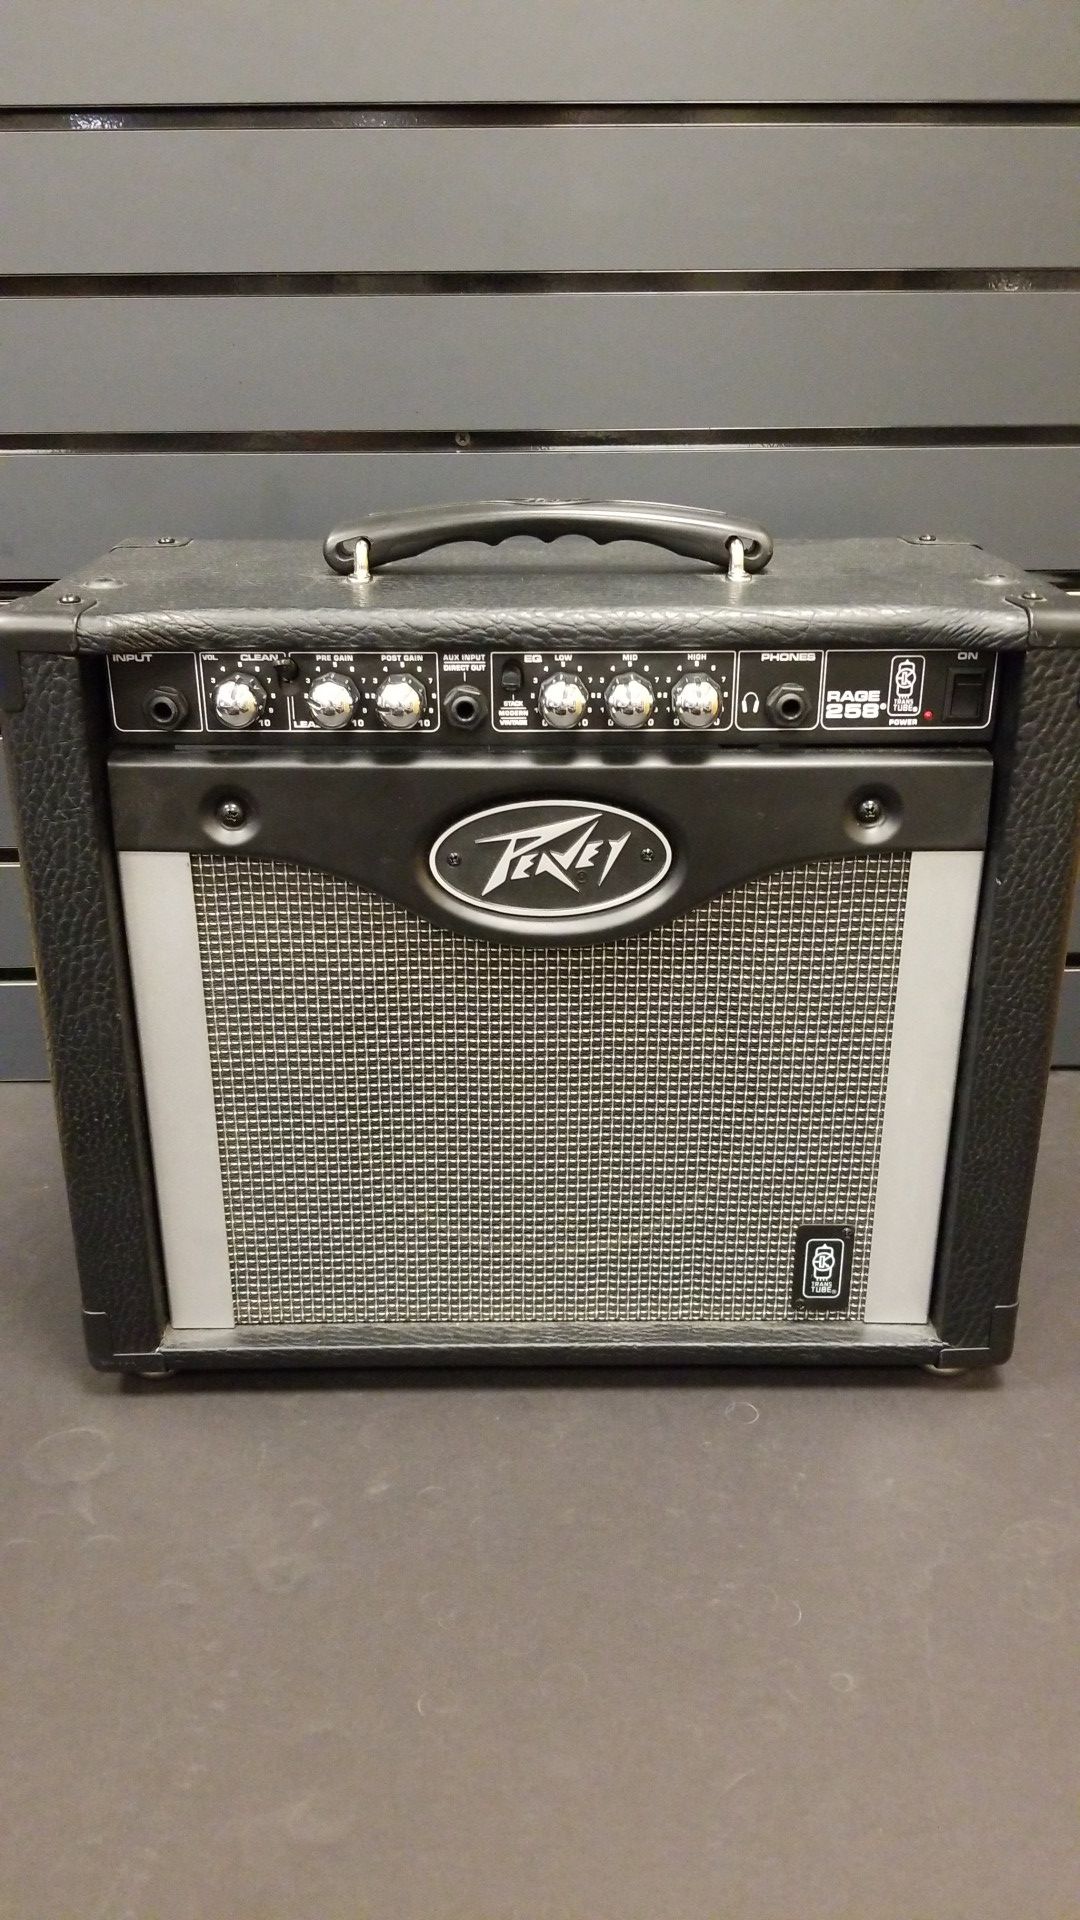 Peavey Rage 258 Combo Amp for Sale in Fort Wayne, IN - OfferUp